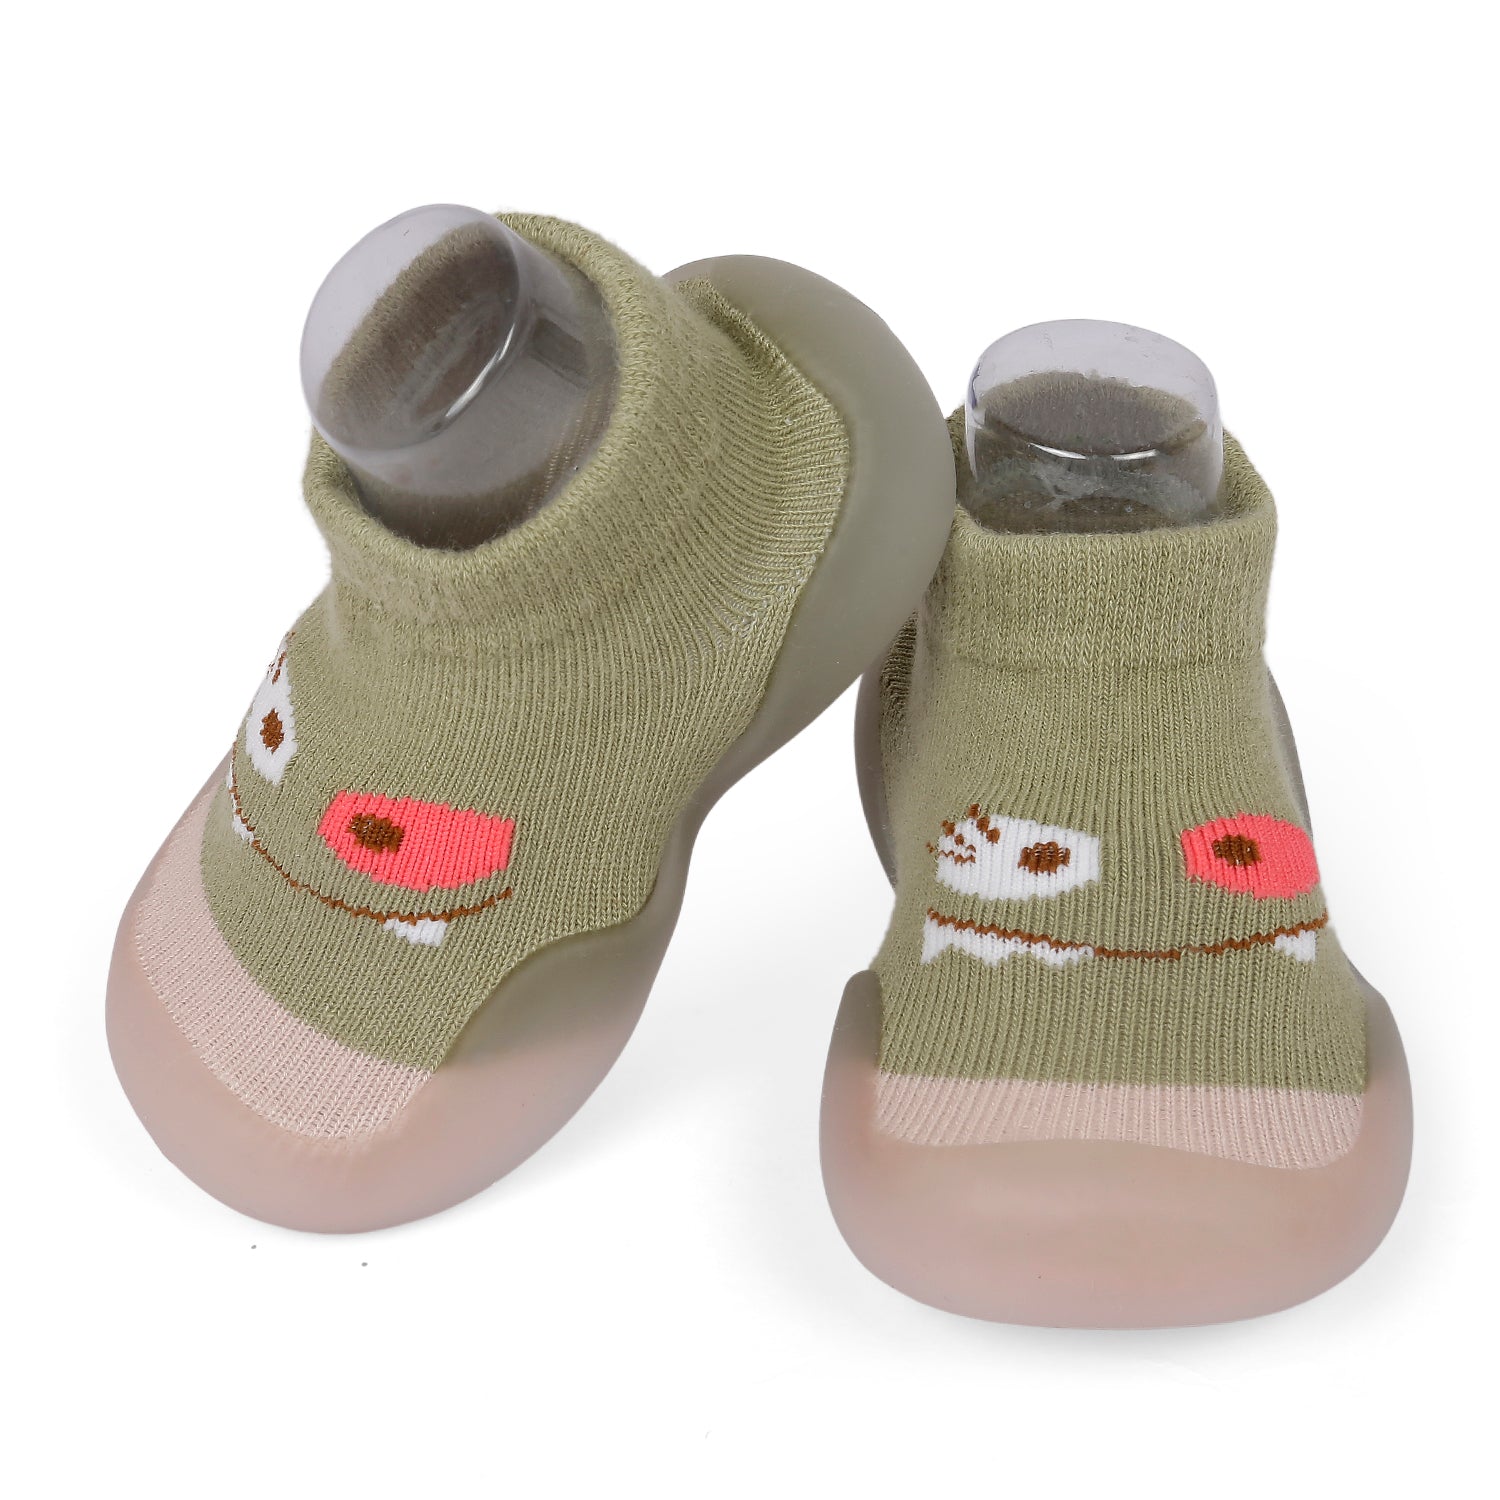 Cute Eye Anti-Skid Slip-On Rubber Sole Shoes - Olive Green - Baby Moo